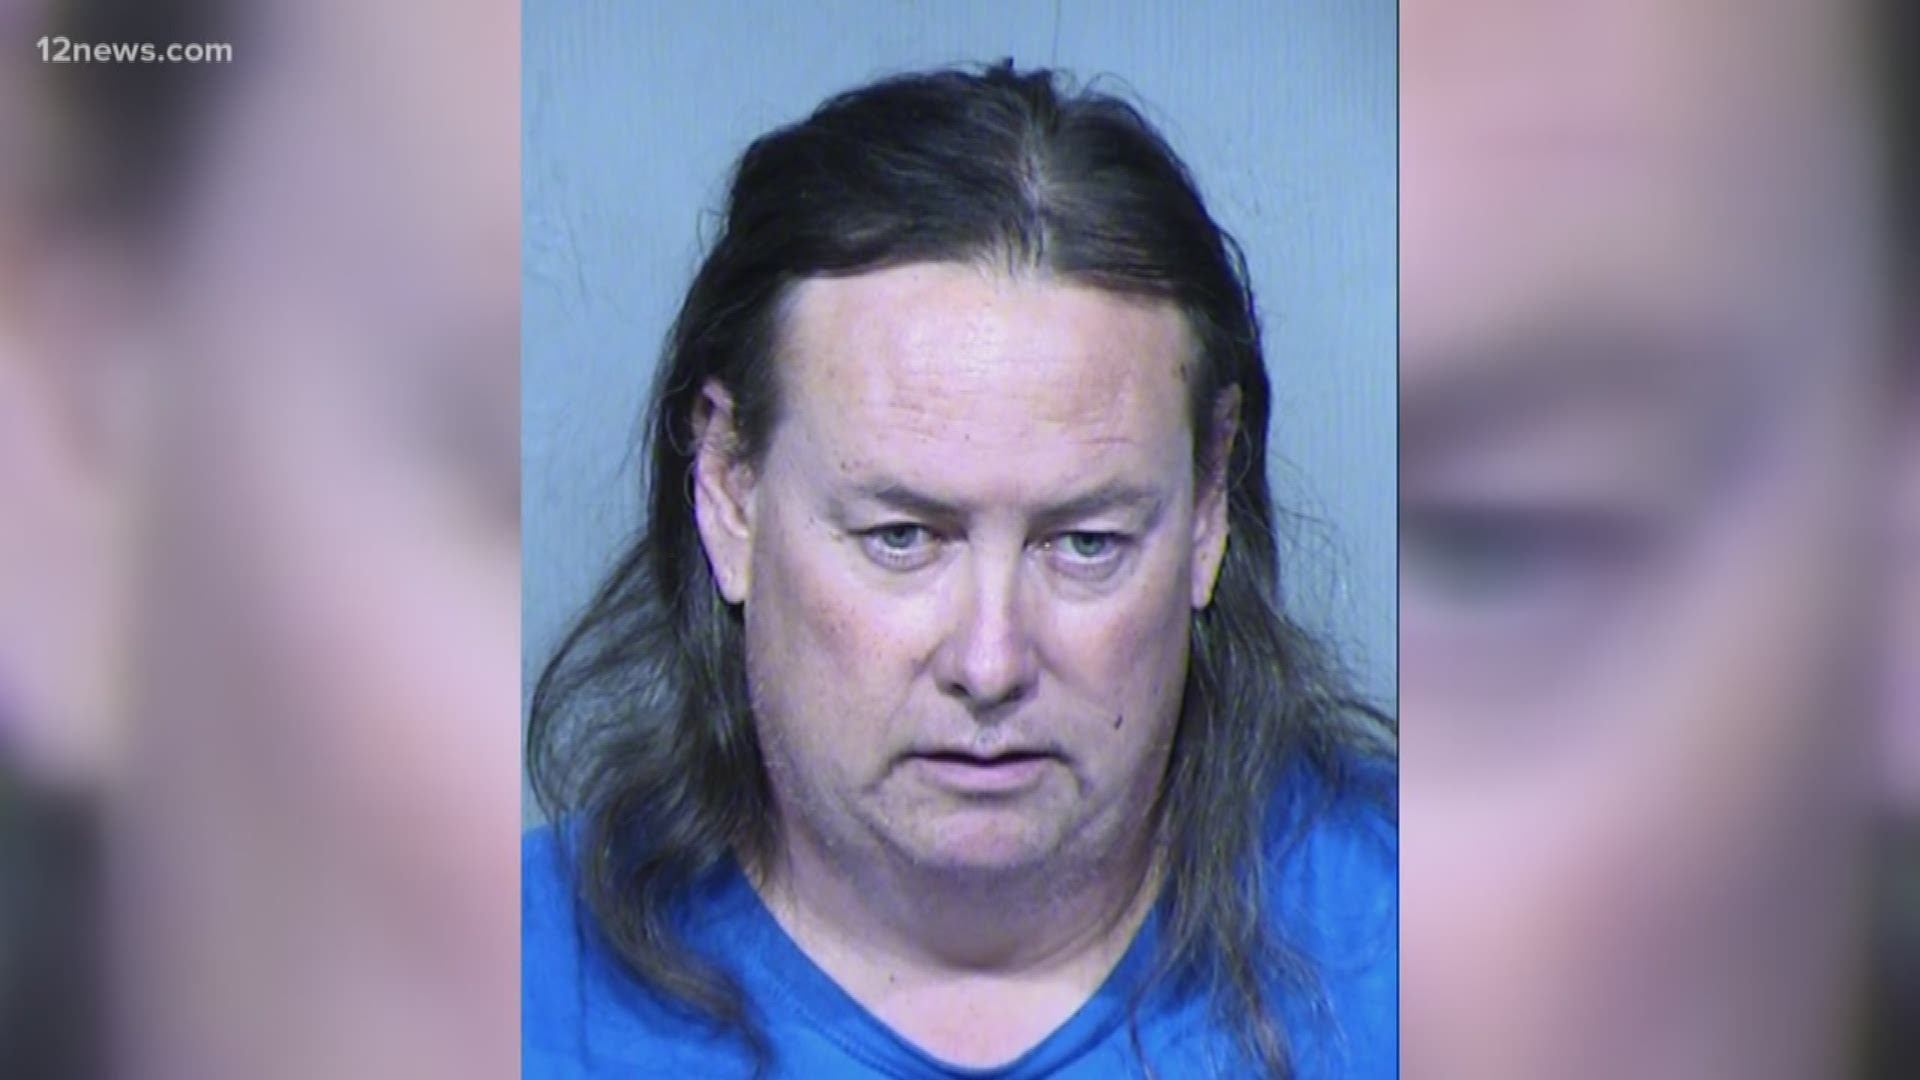 A Mesa school bus driver is facing charges of child abuse and endangerment. Police say Jamie Tellez intentionally slammed on the brakes to hurt one of the children.